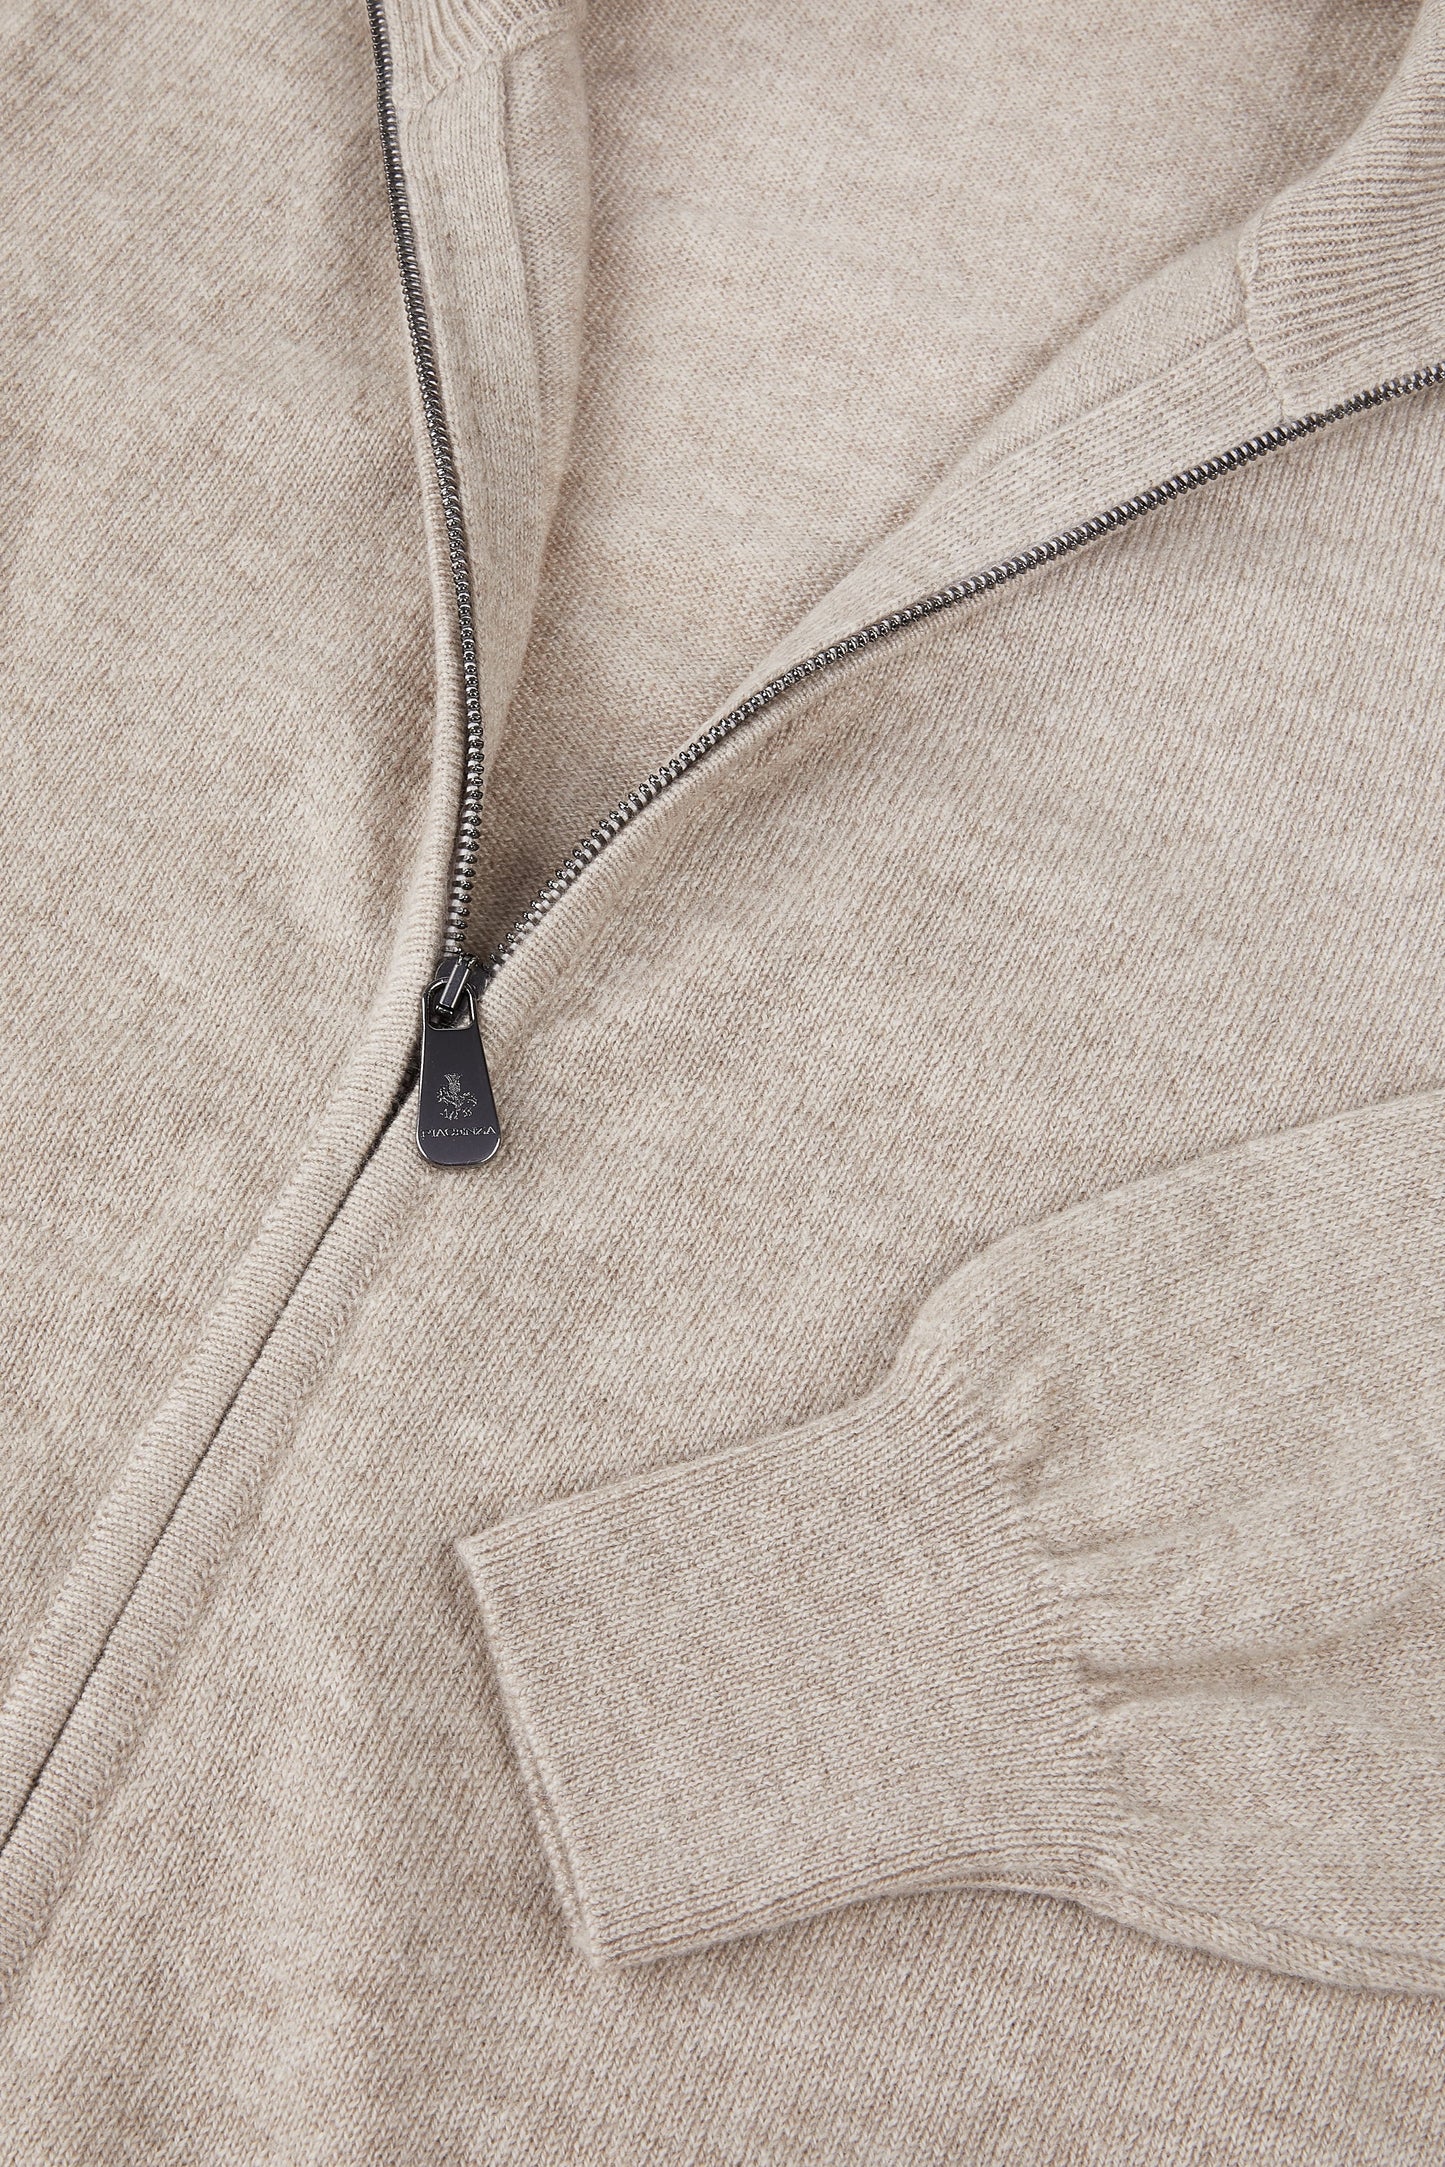 Sand zip cardigan in pure cashmere